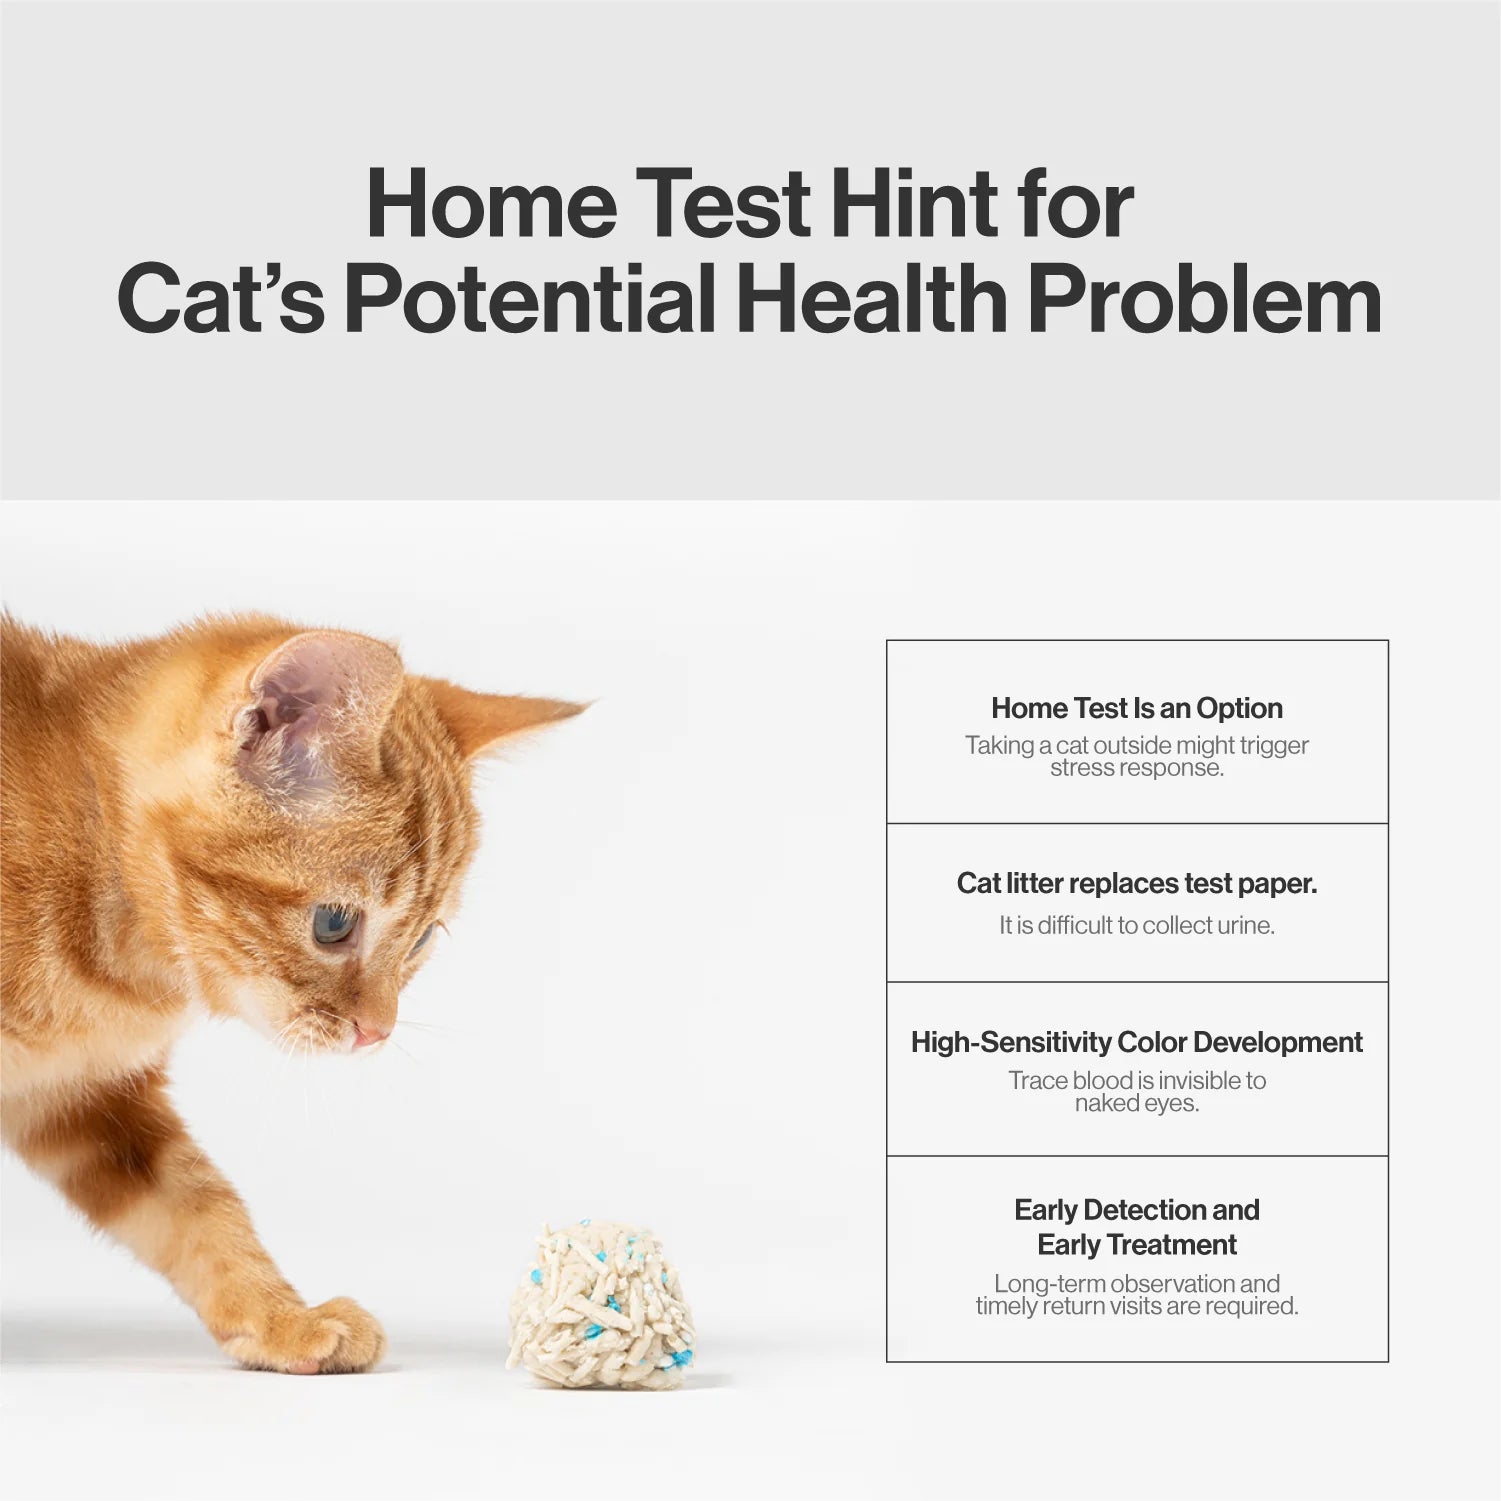 pidan Cat Litter Tofu Mix with The Occult blood test particles